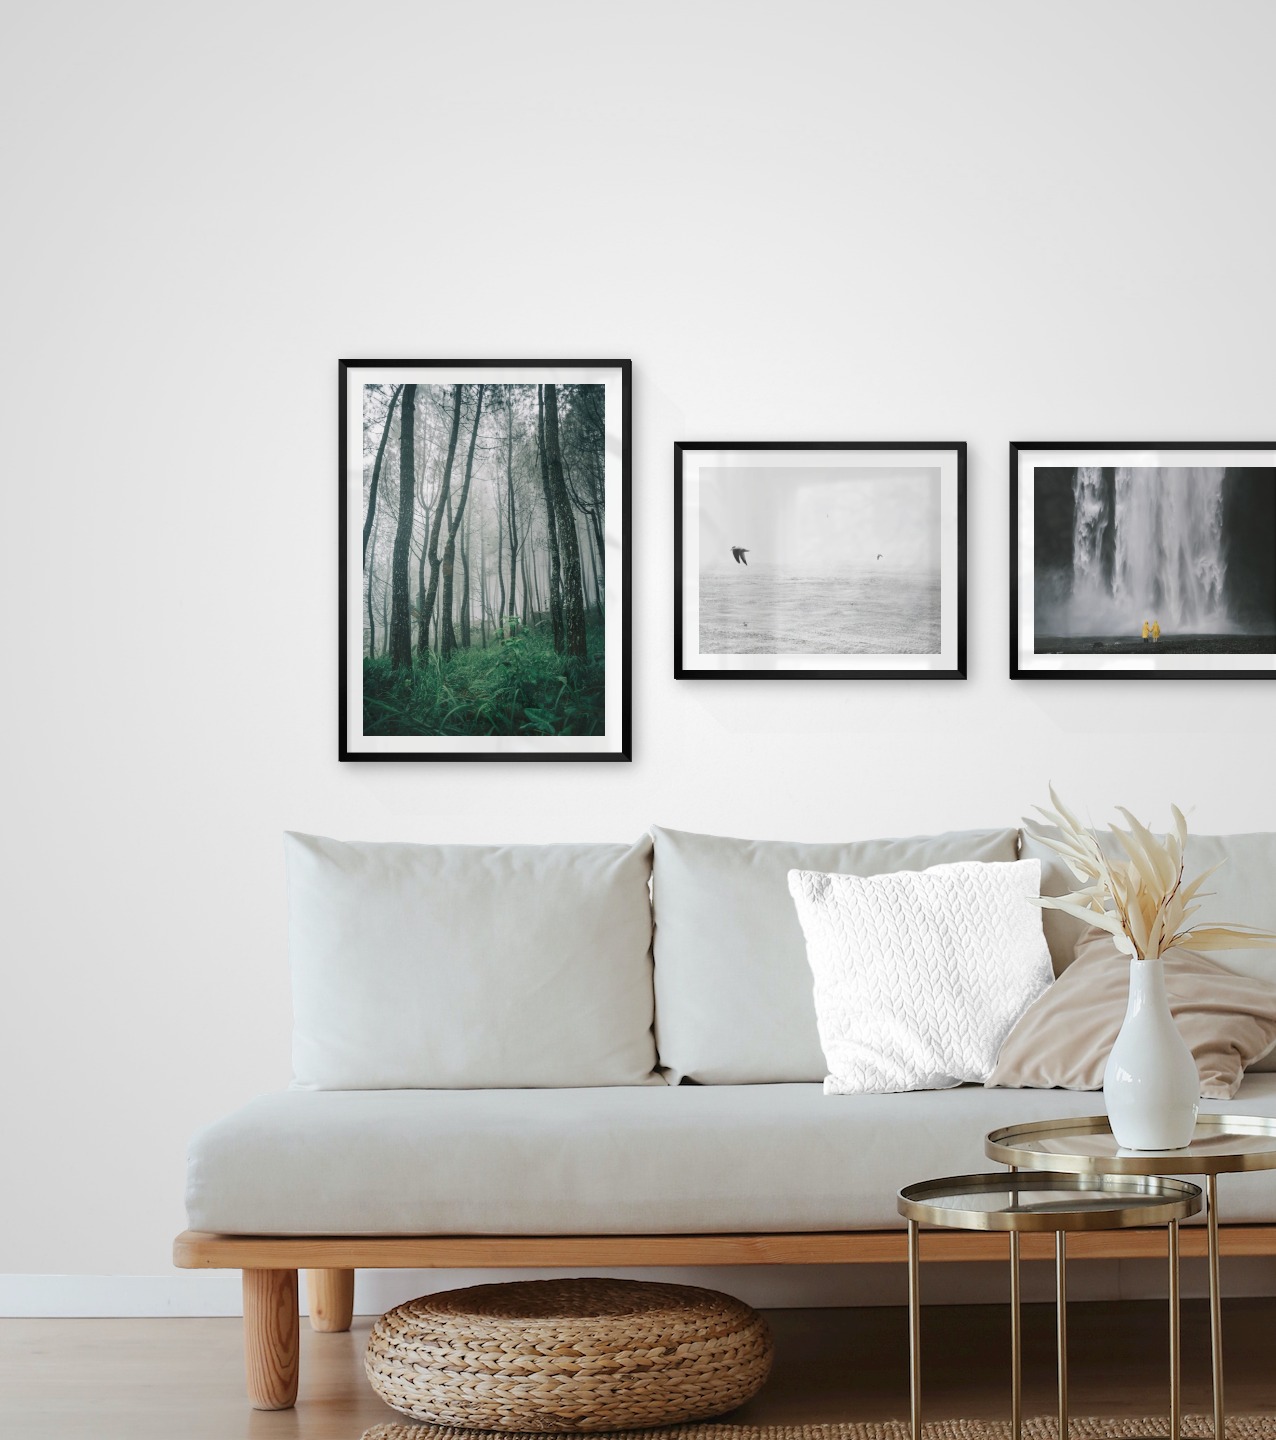 Gallery wall with picture frames in black in sizes 50x70 and 40x50 with prints "Tall trees", "Birds over the sea" and "Waterfall with people"